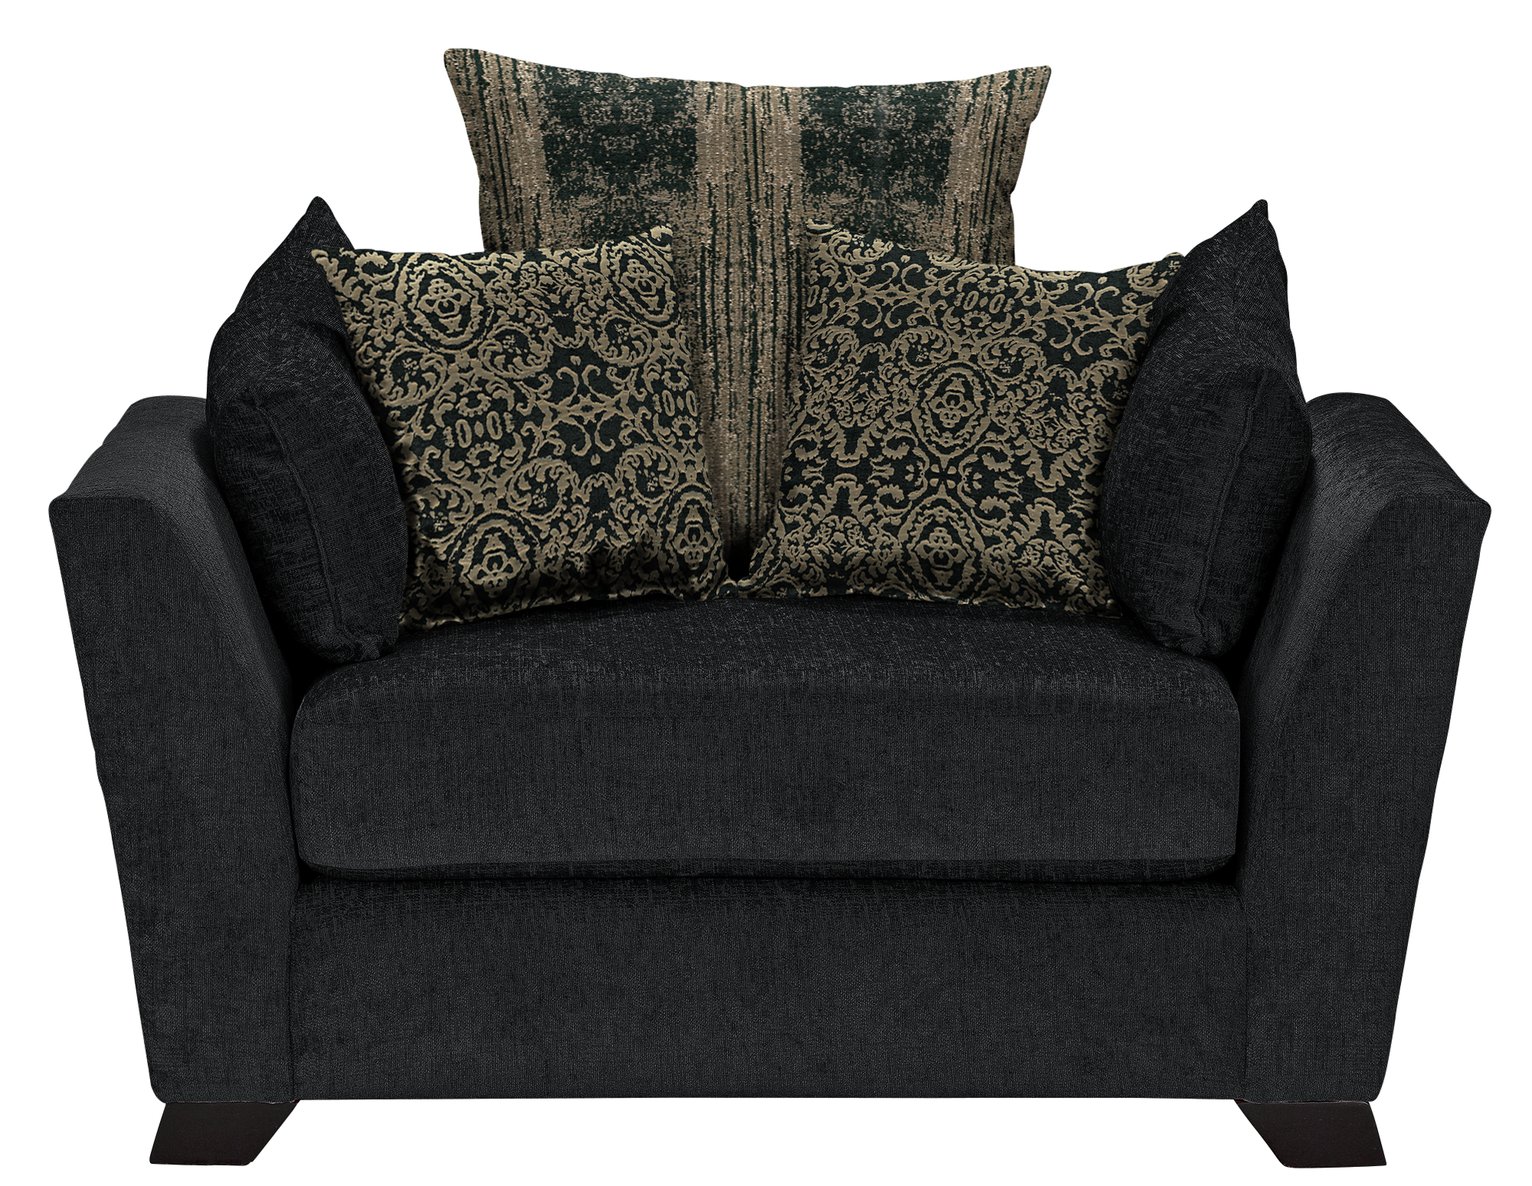 Argos Home Vivienne Fabric Cuddle Chair - Black and Gold